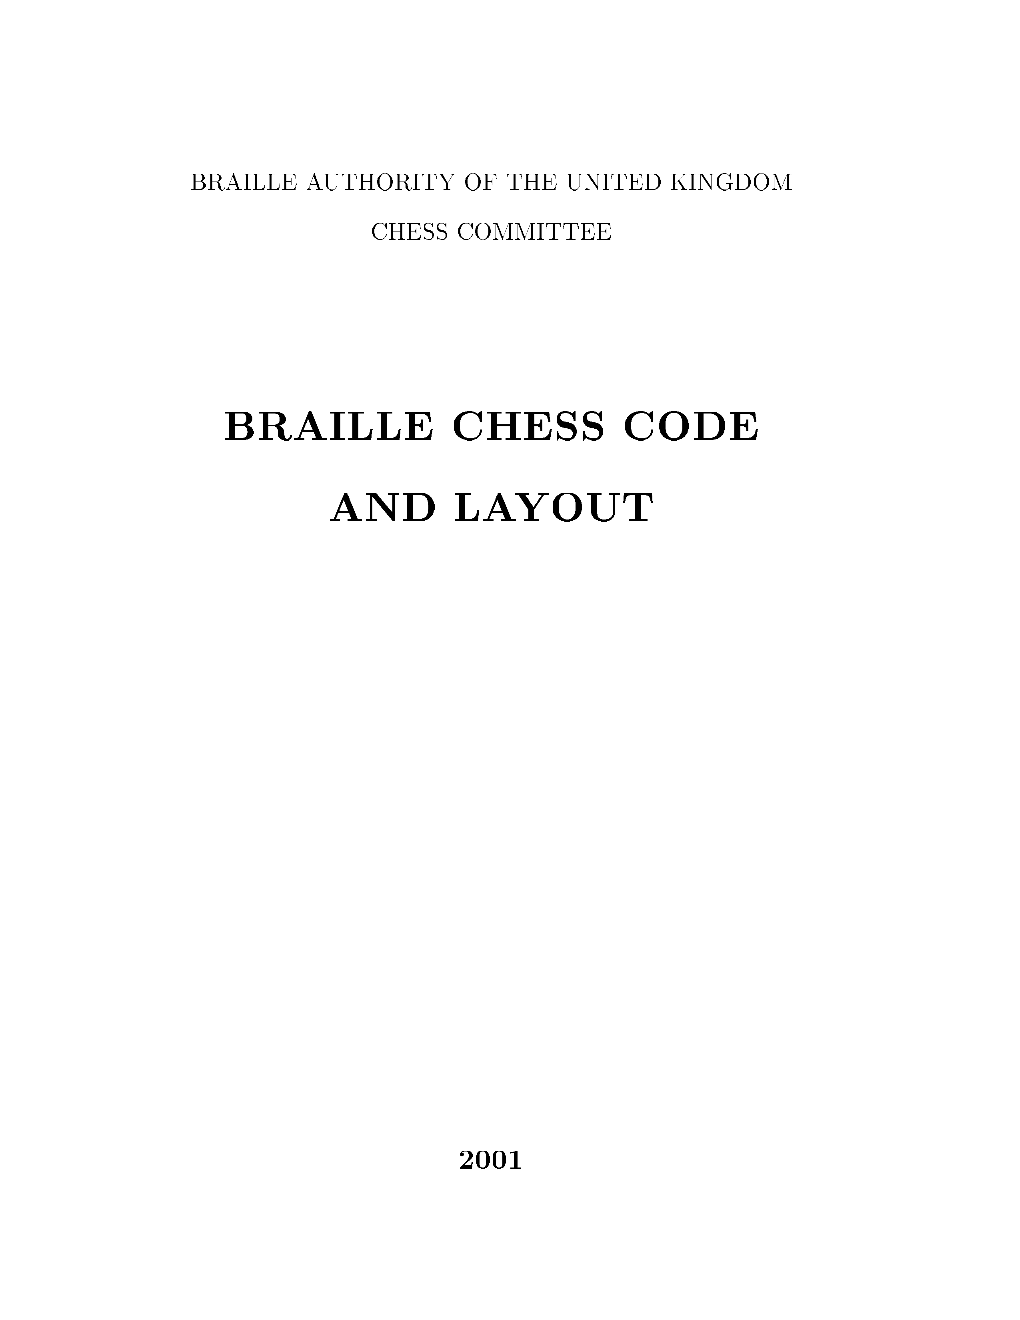 Braille Chess Code and Layout